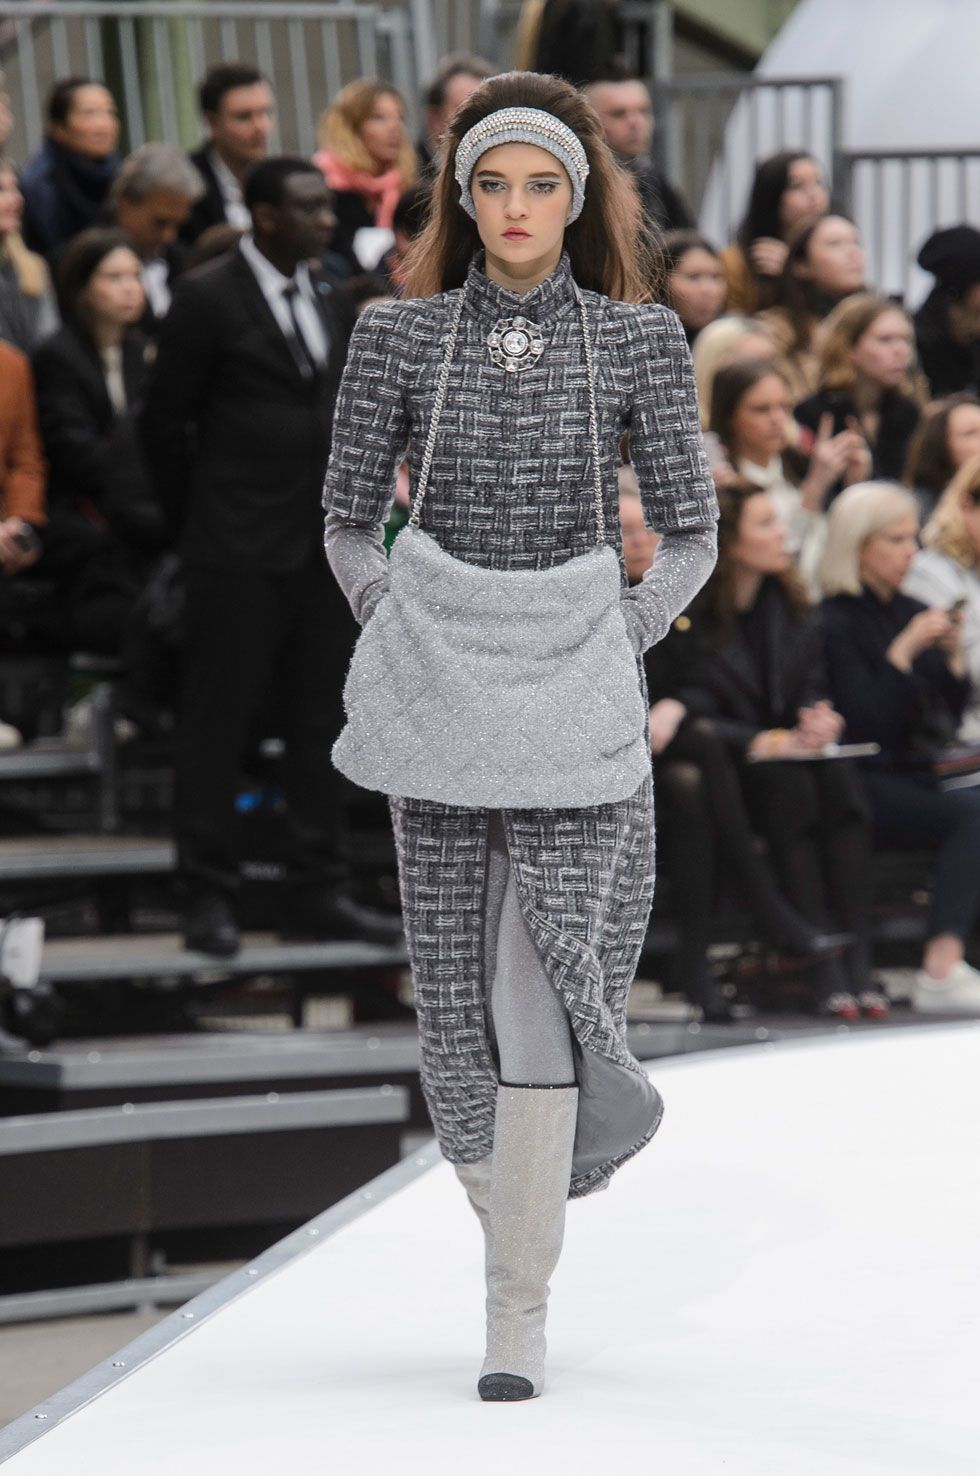 96 Looks From Chanel Fall 2017 PFW Show - Chanel Runway at Paris Fashion  Week